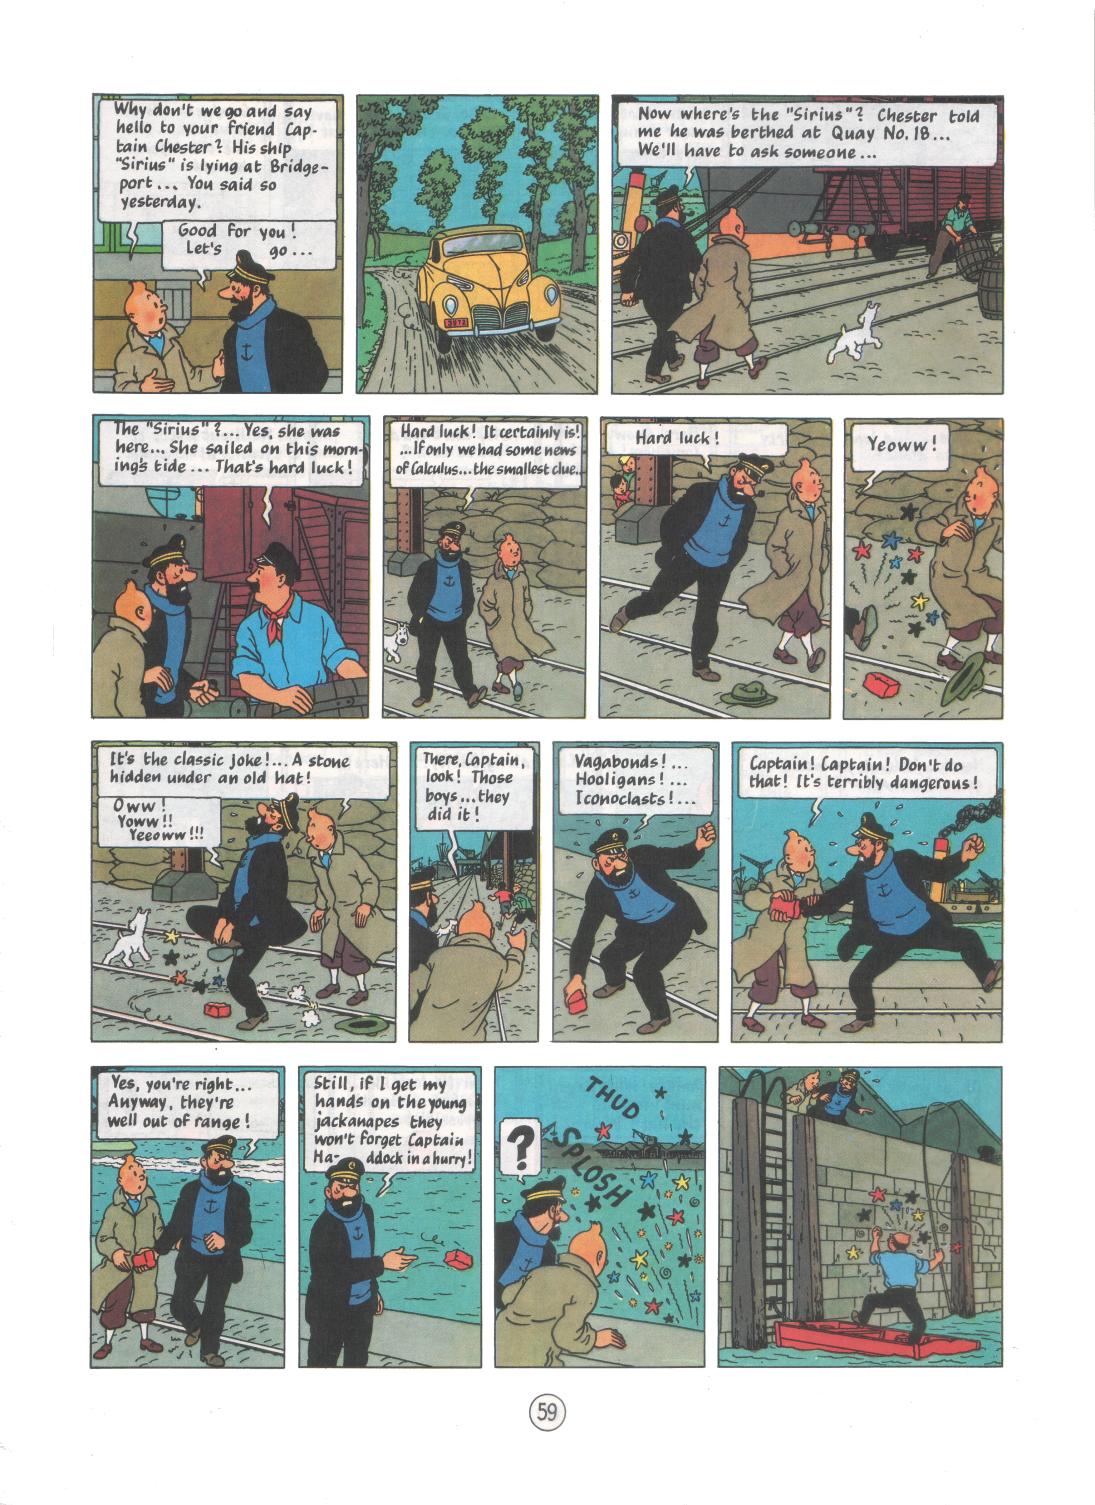 13 Cameos of Herge, Tintin, Quick & Flupke, Mr. Mops, Edgar Jacobs, and ...